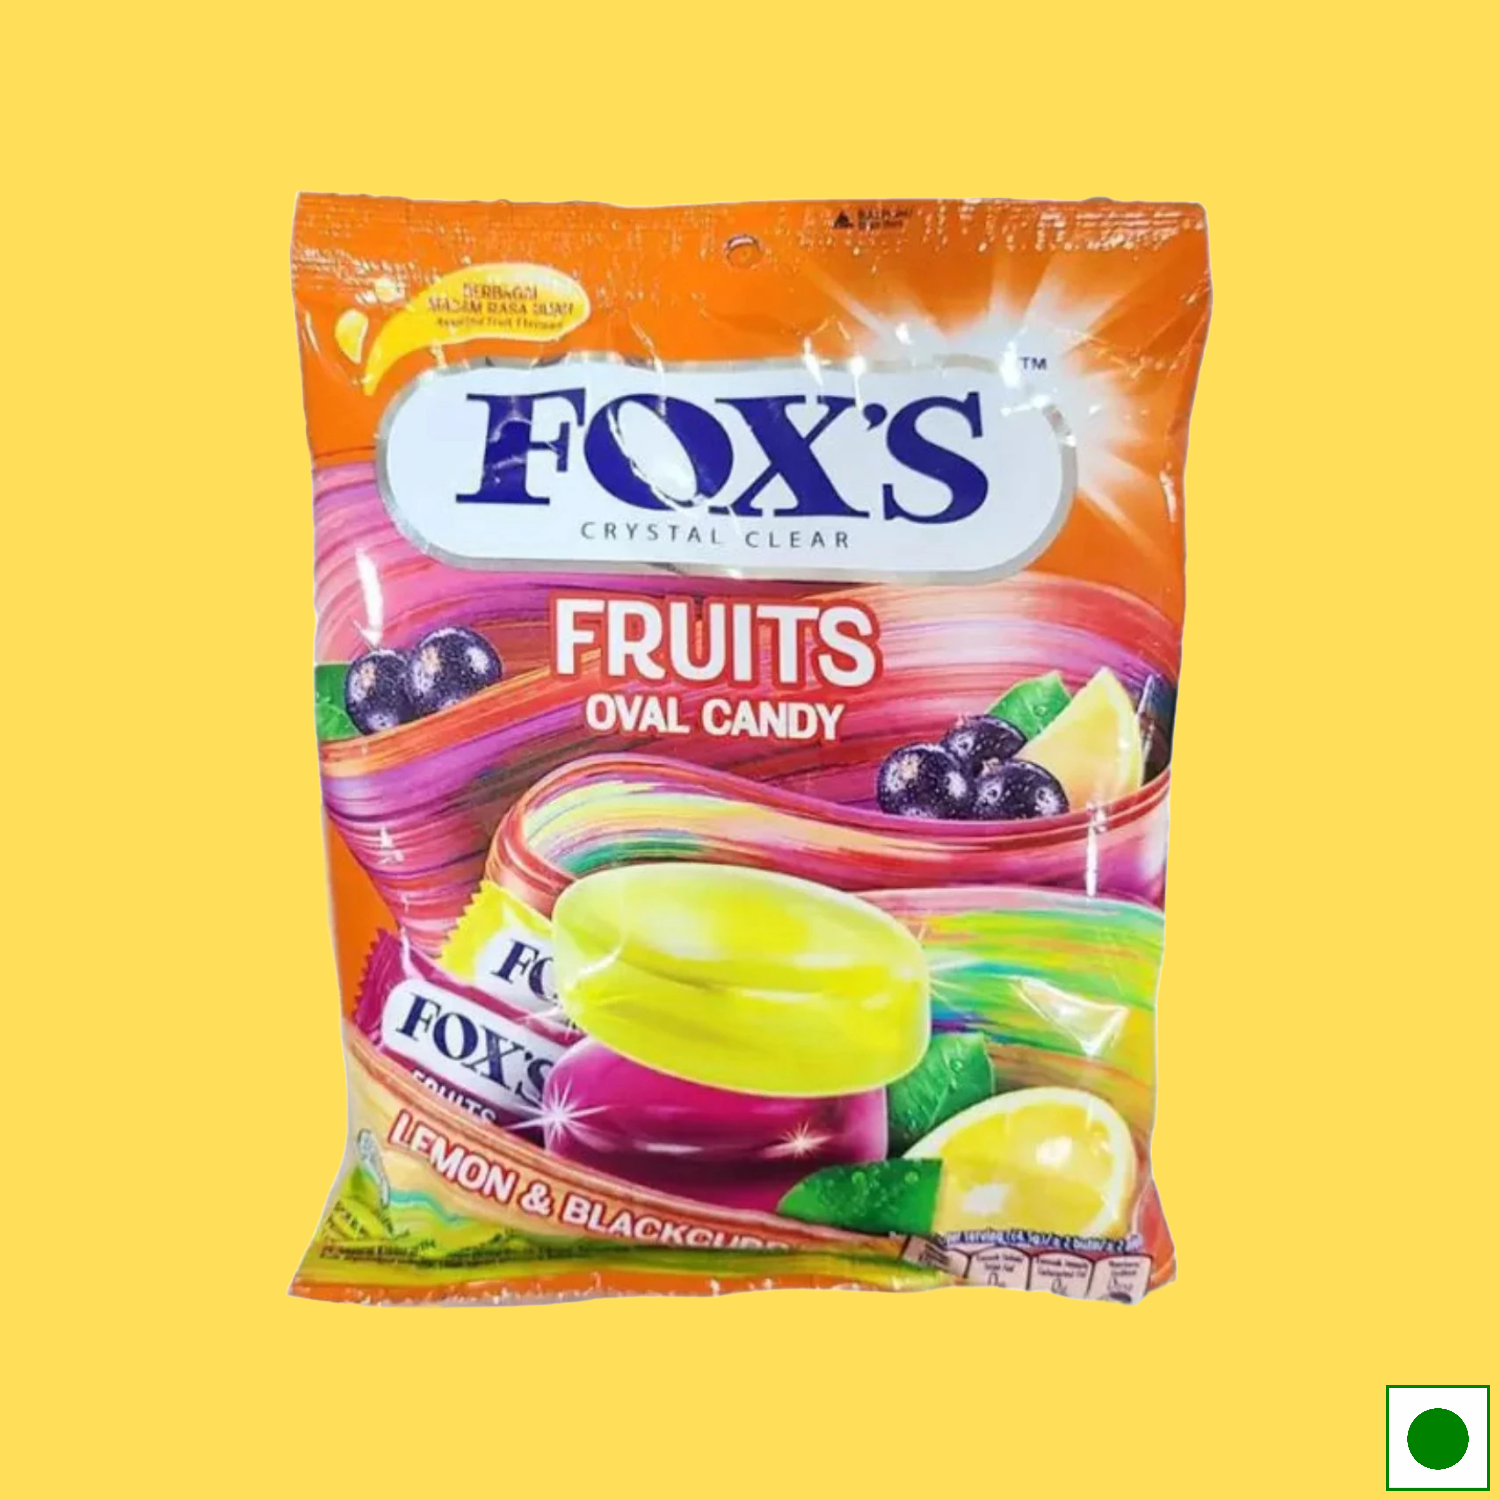 Fox's Fruits Oval Candy- Lemon and Blackcurrant, 125g (Imported)